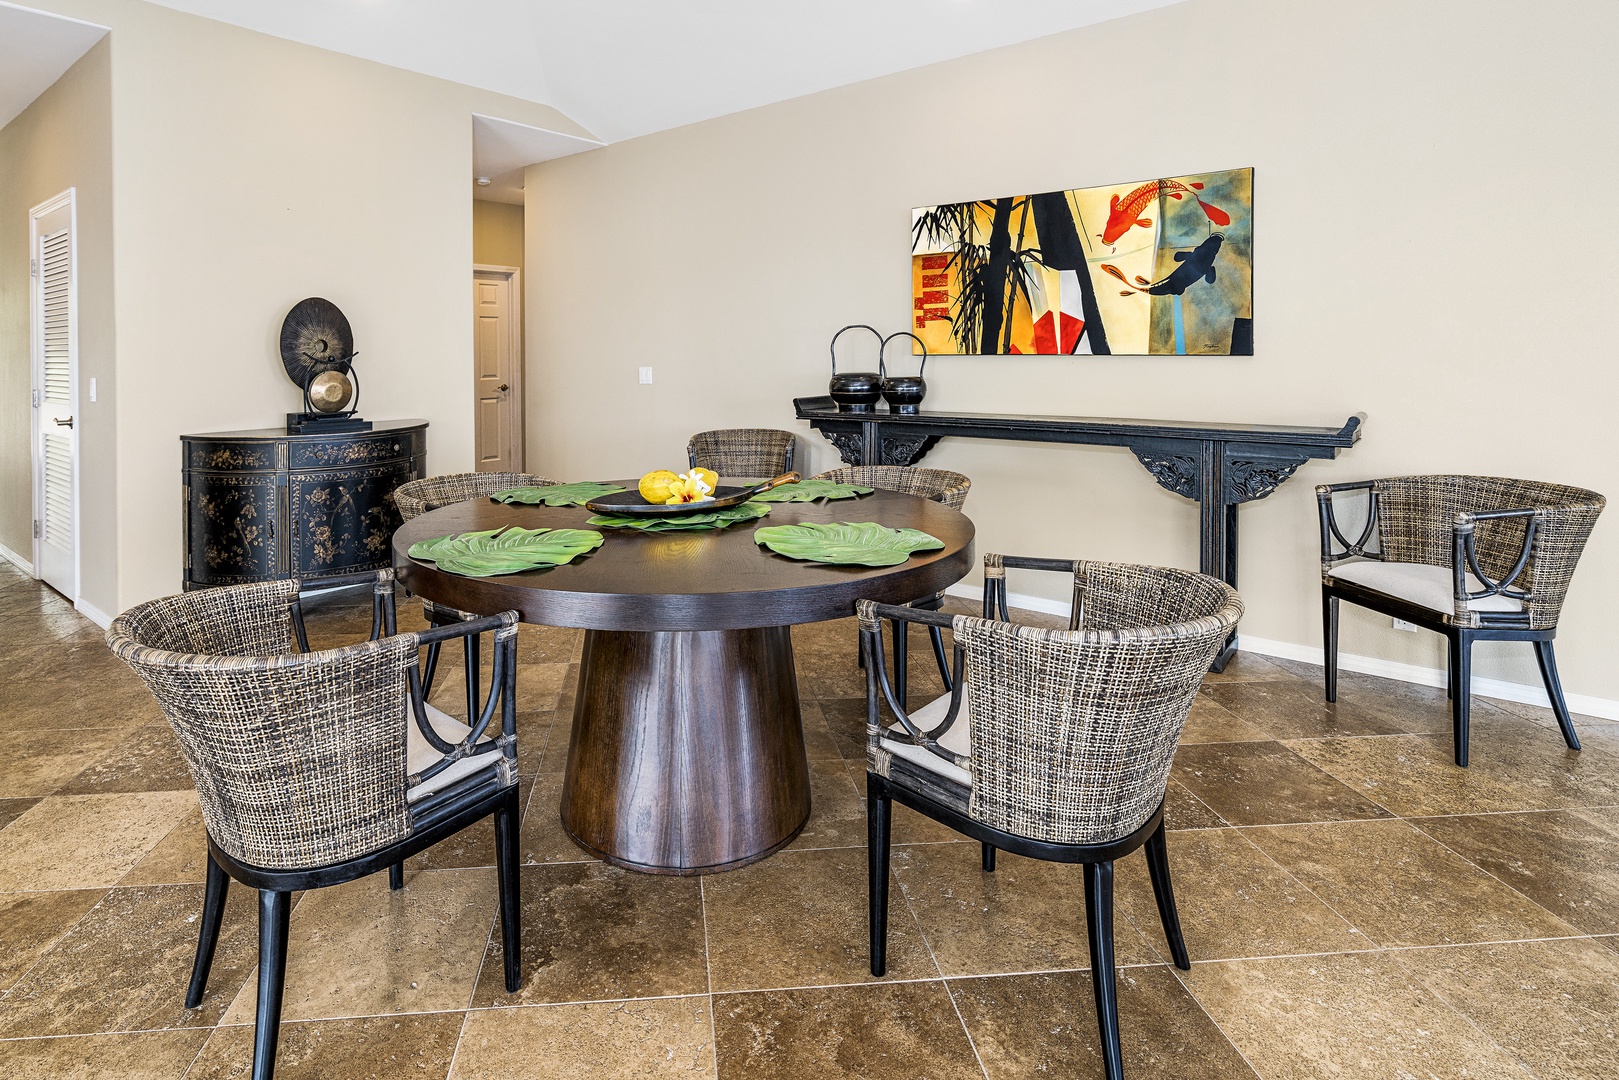 Kailua Kona Vacation Rentals, Sunset Hale - Indoor dining for up to 6 guests!